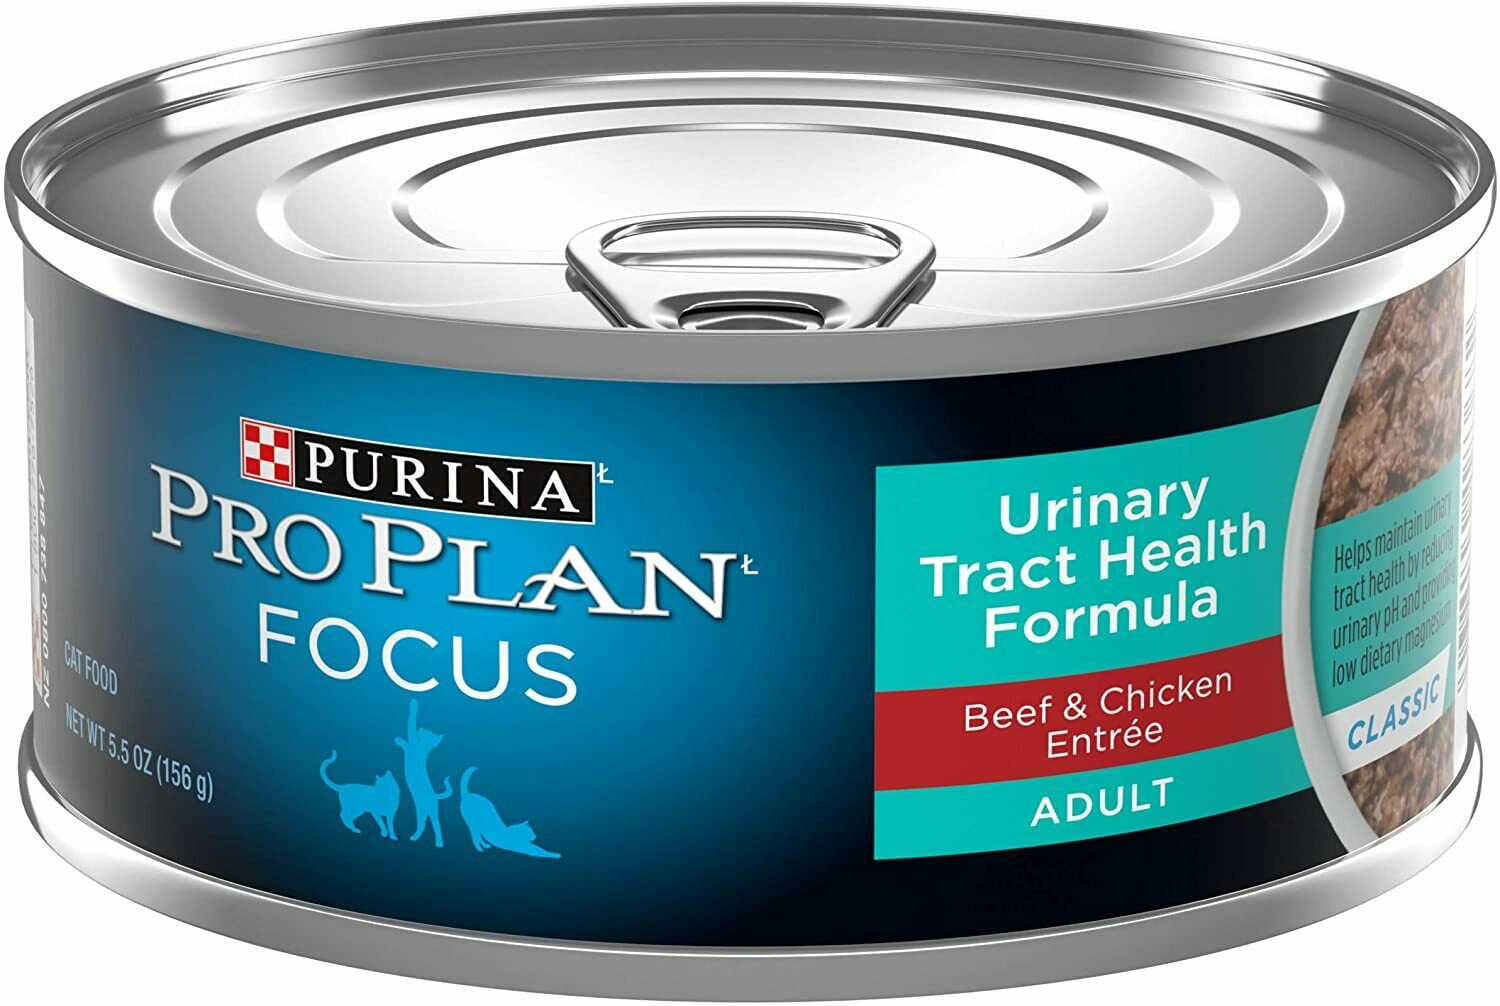 Purina Pro Plan Focus Cat Food Adult Urinary Tract Health Formula Chicken Entree